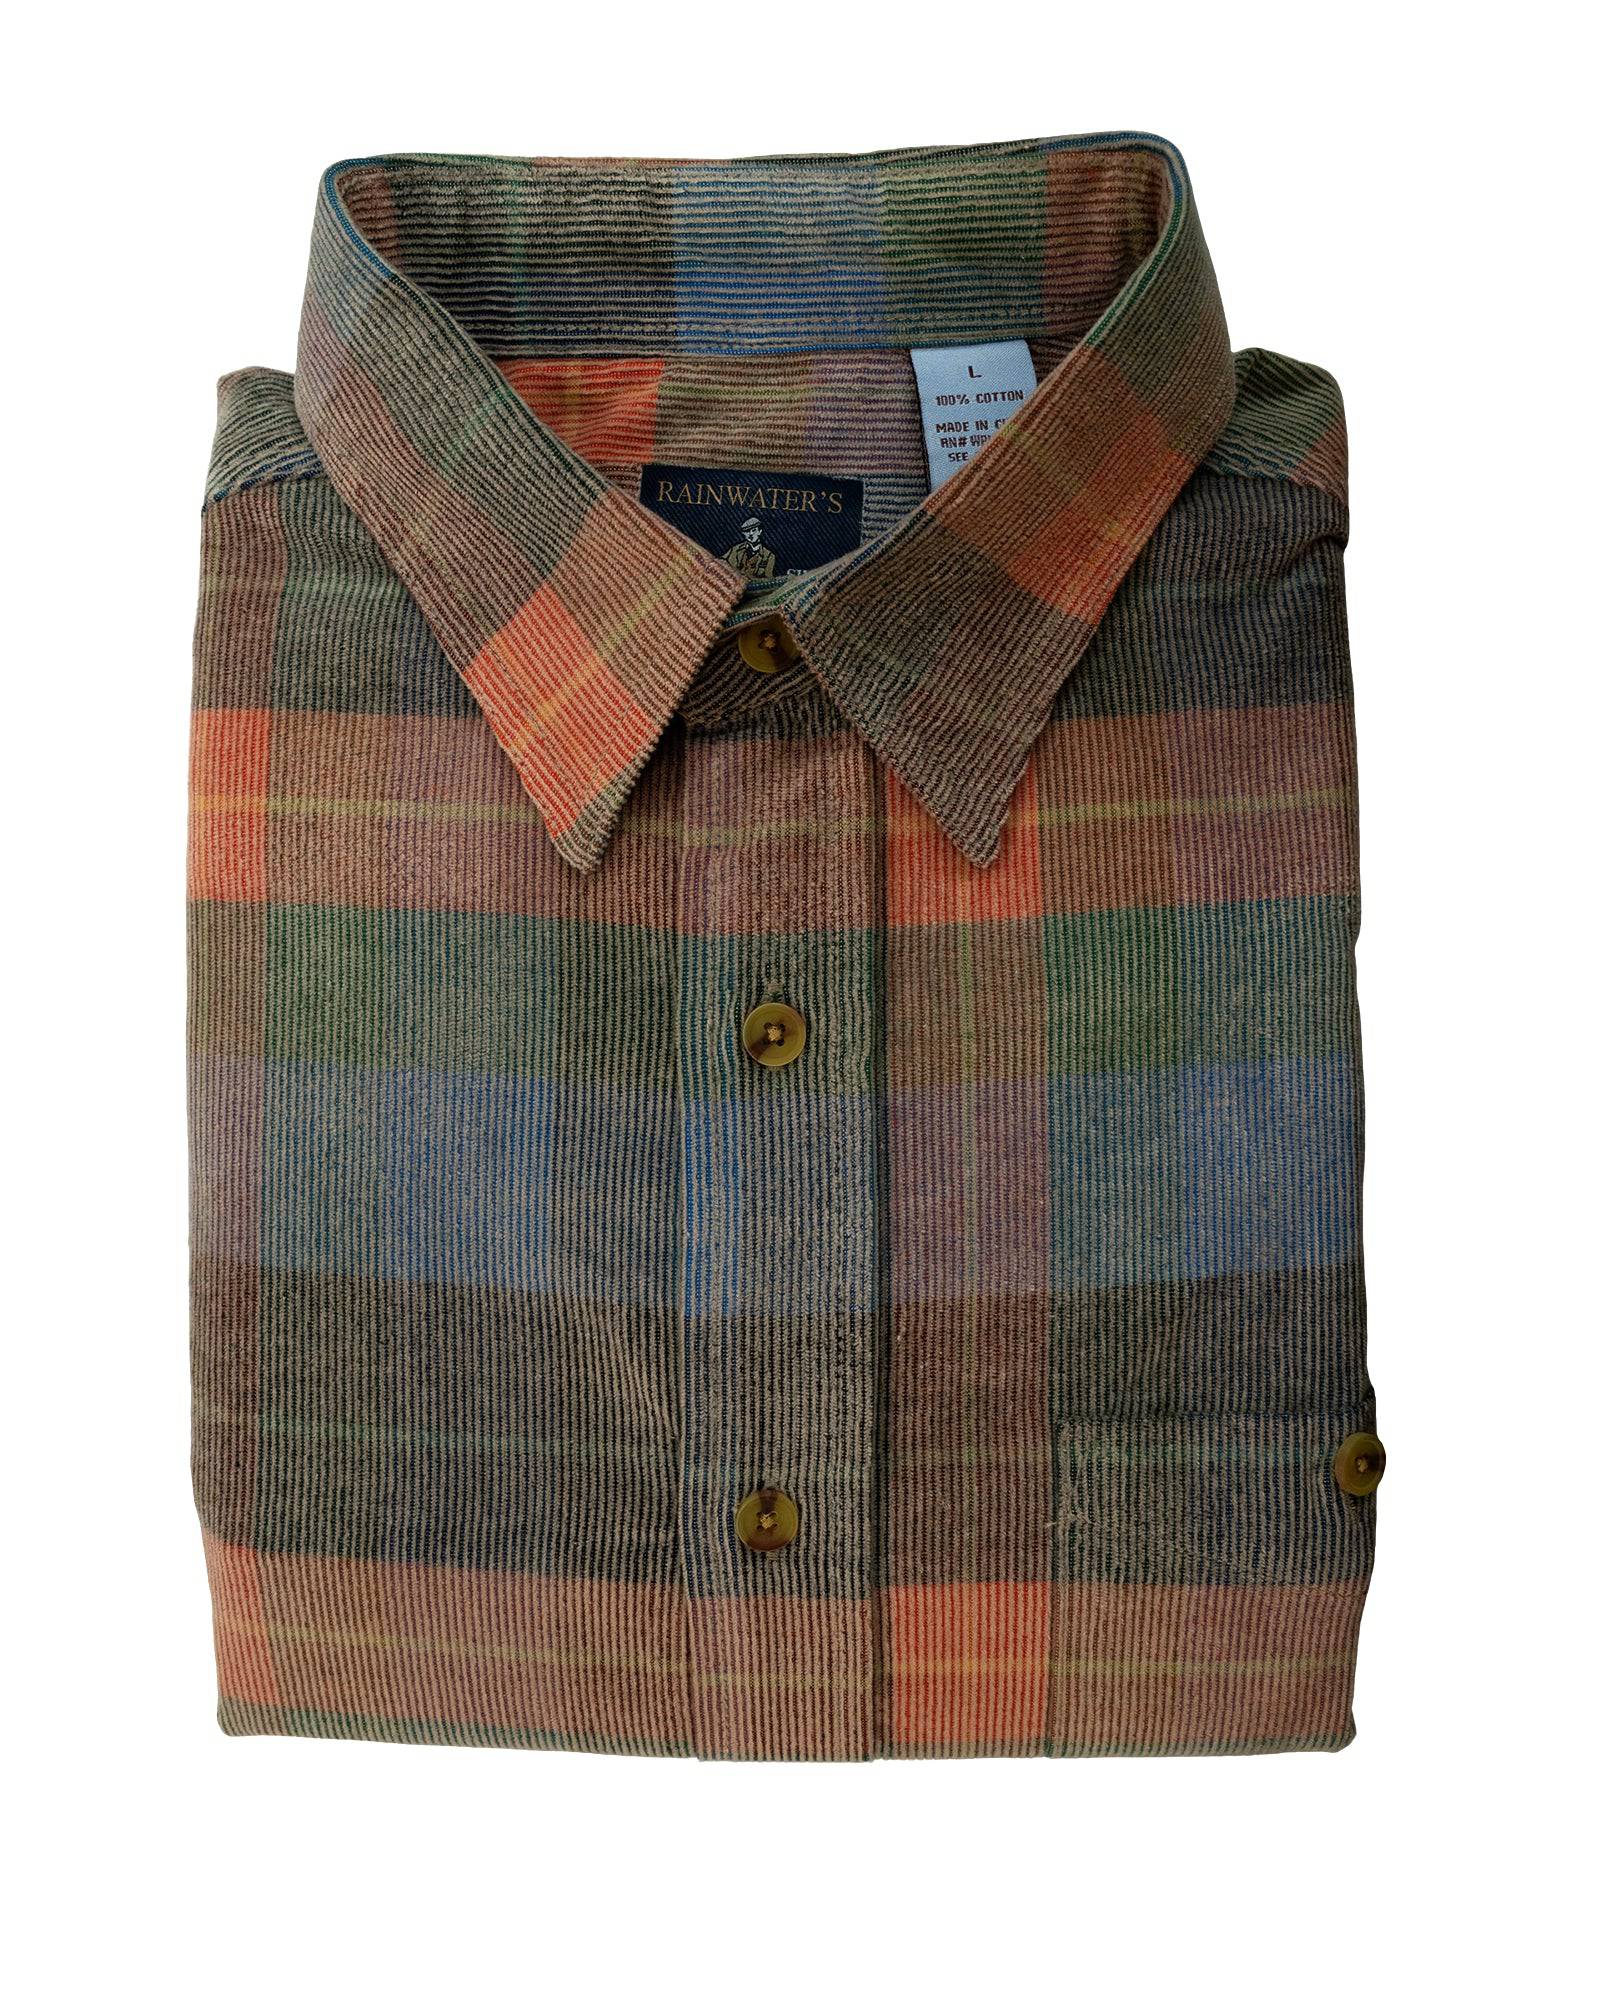 Washed Corduroy Sport Shirt In Blue, Brown and Orange Plaid - Rainwater's Men's Clothing and Tuxedo Rental